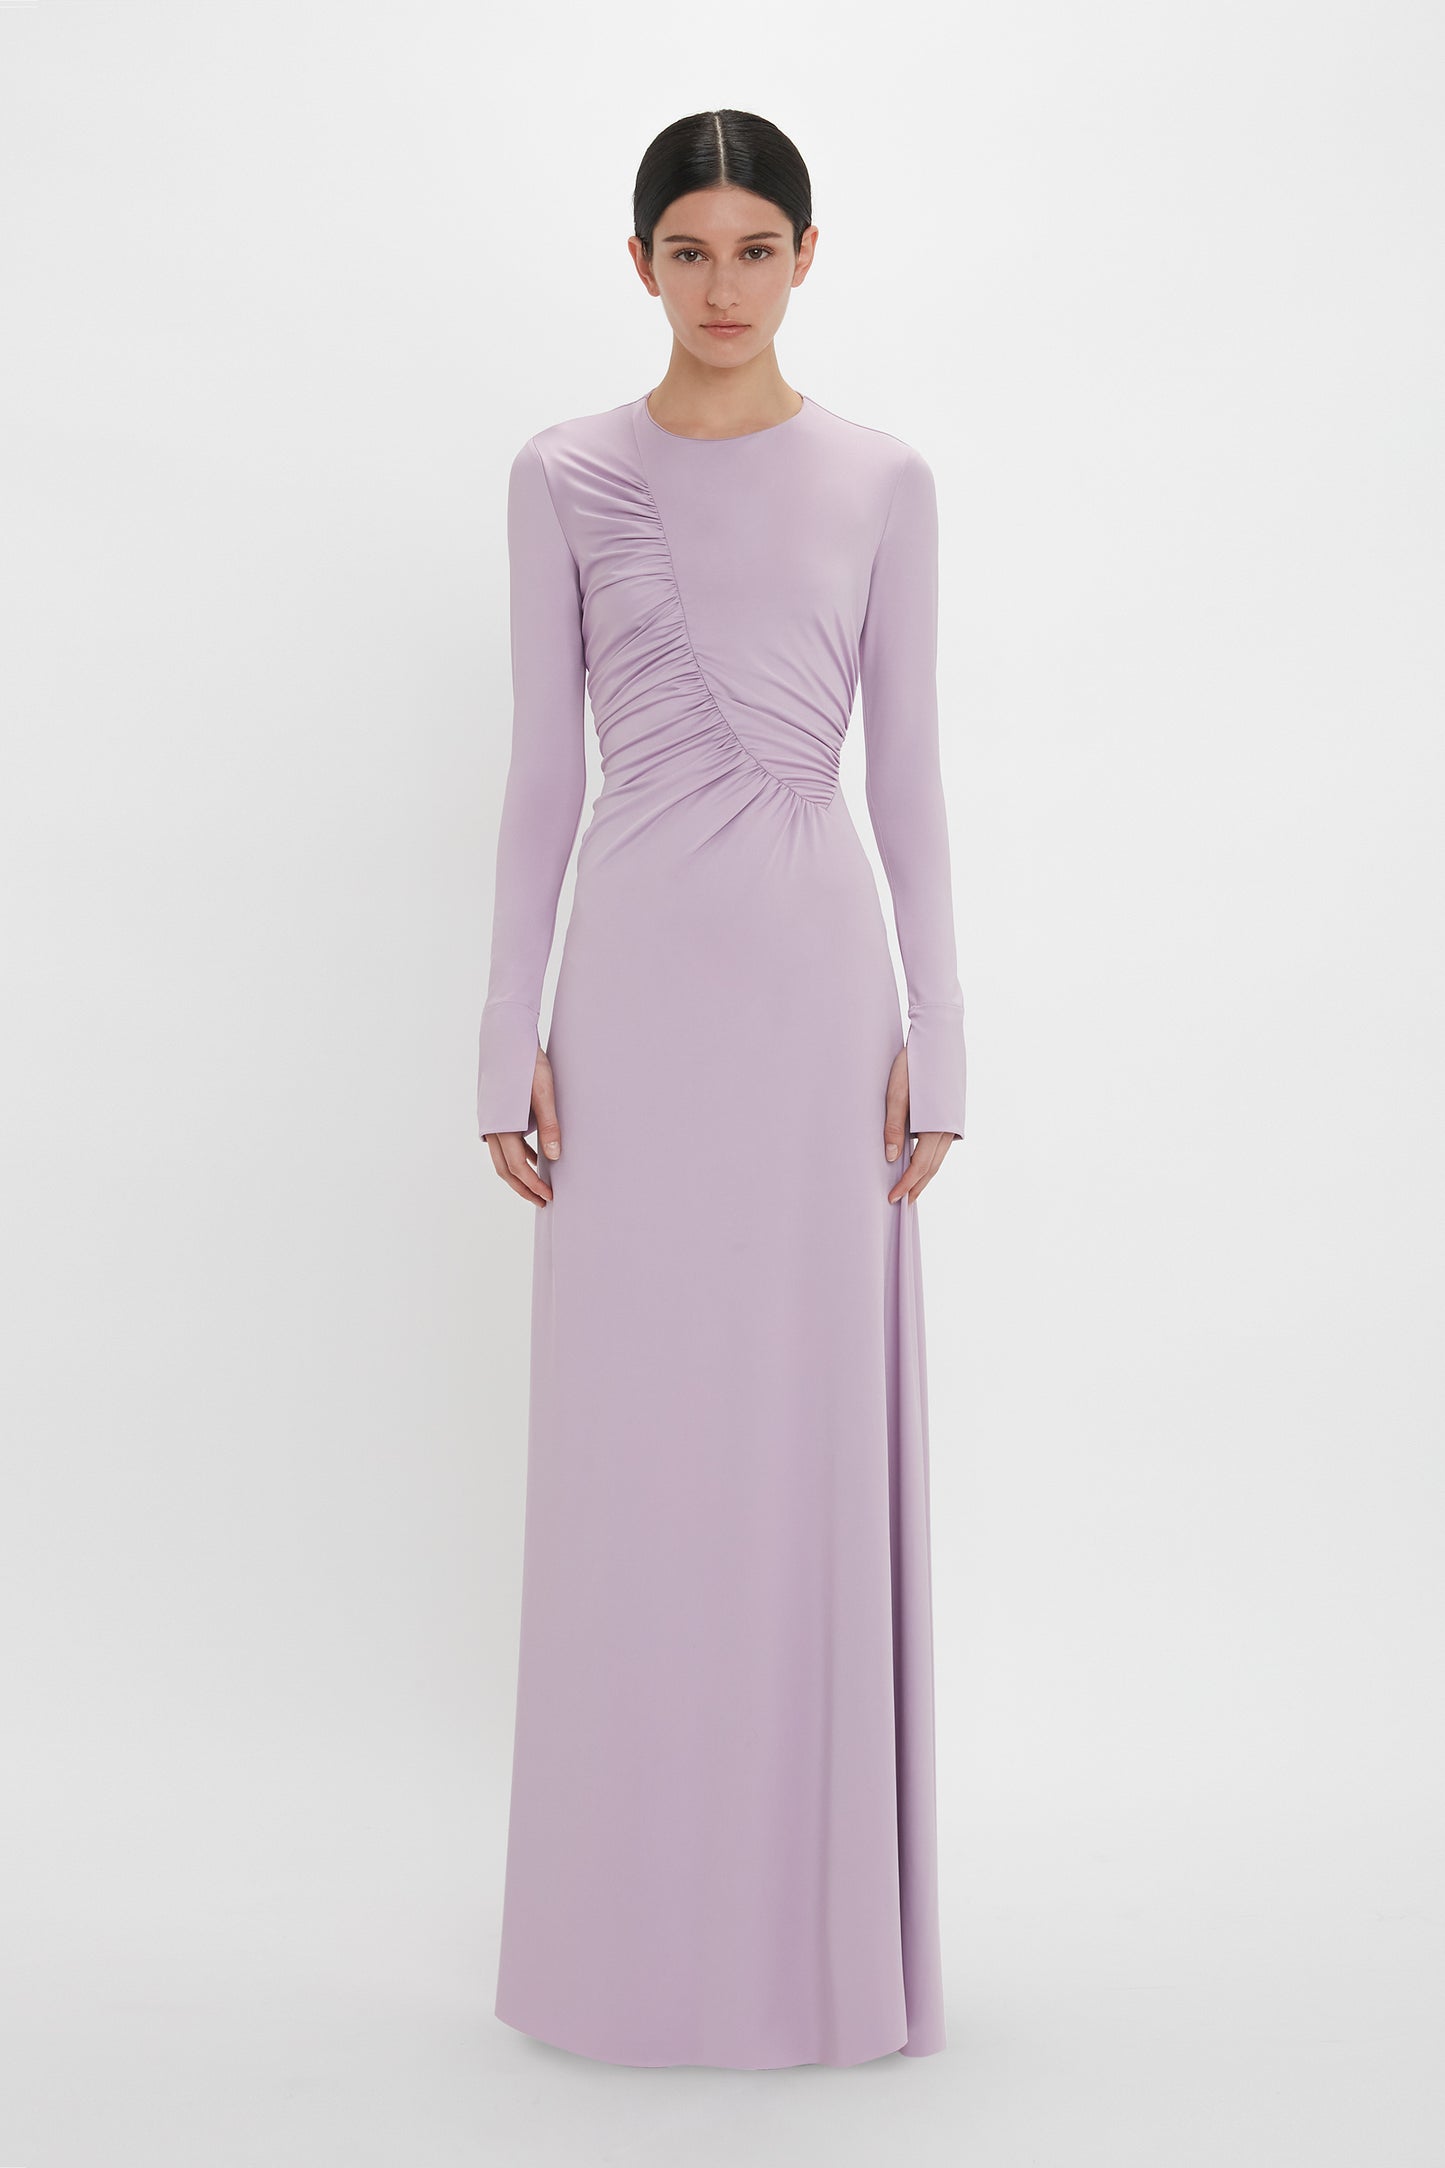 A person stands against a plain background wearing a long-sleeved, floor-length Victoria Beckham Ruched Detail Floor-Length Gown In Petunia, showcasing understated glamour with gathered detailing on one side.